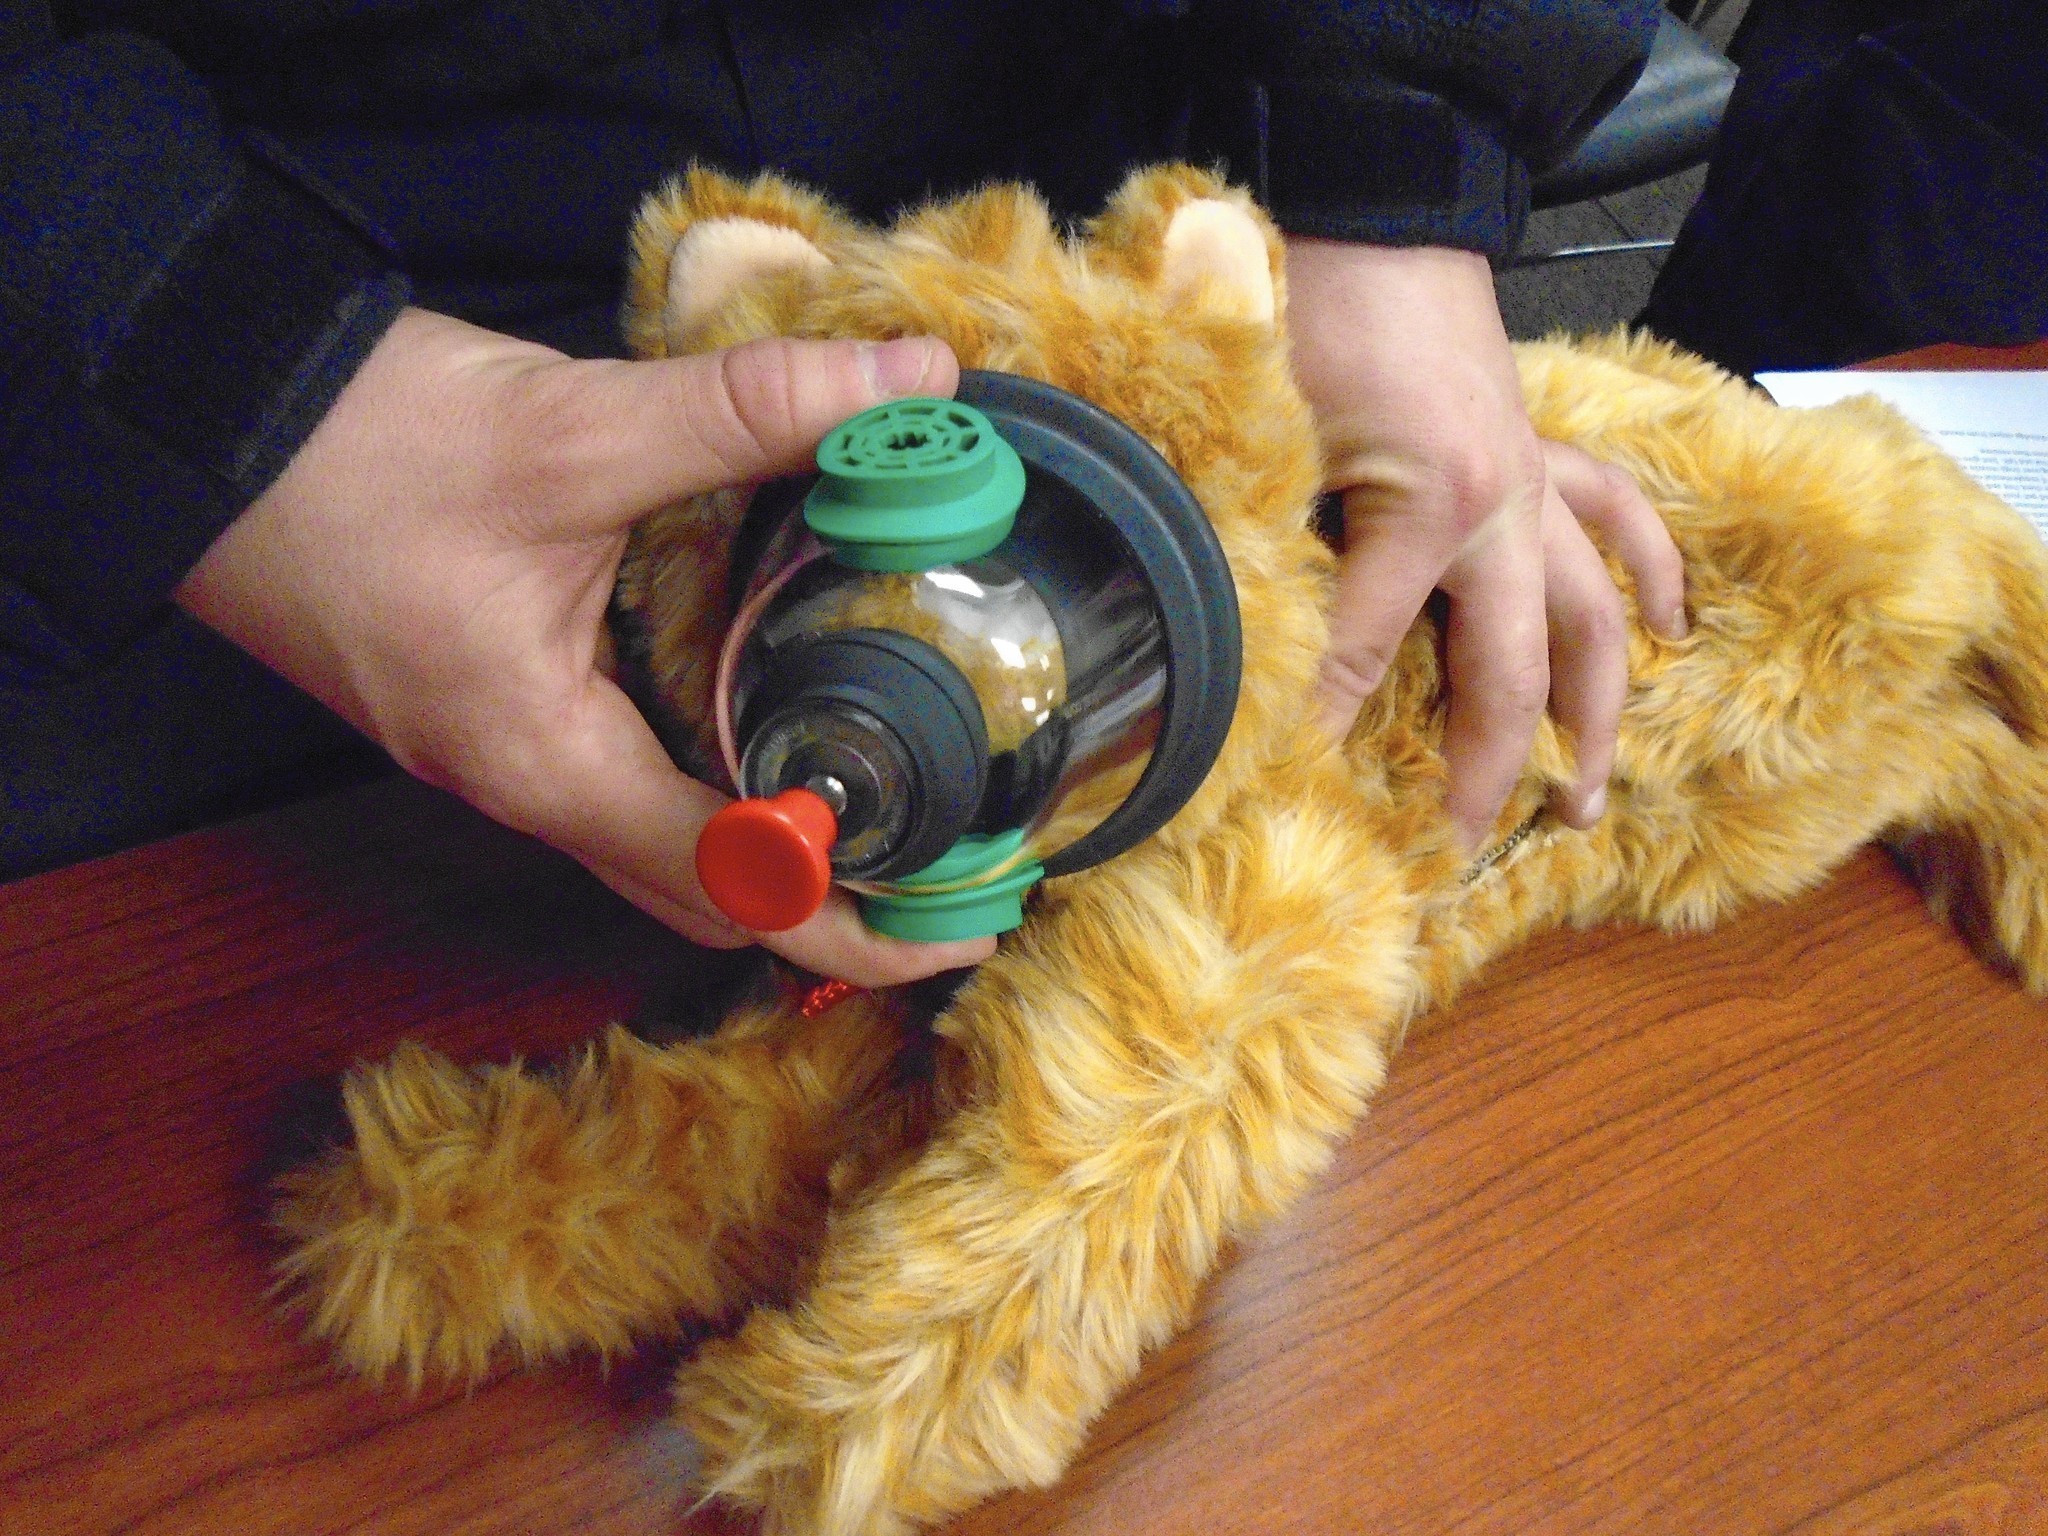 Animal oxygen masks can save lives of pets, firefighters ...